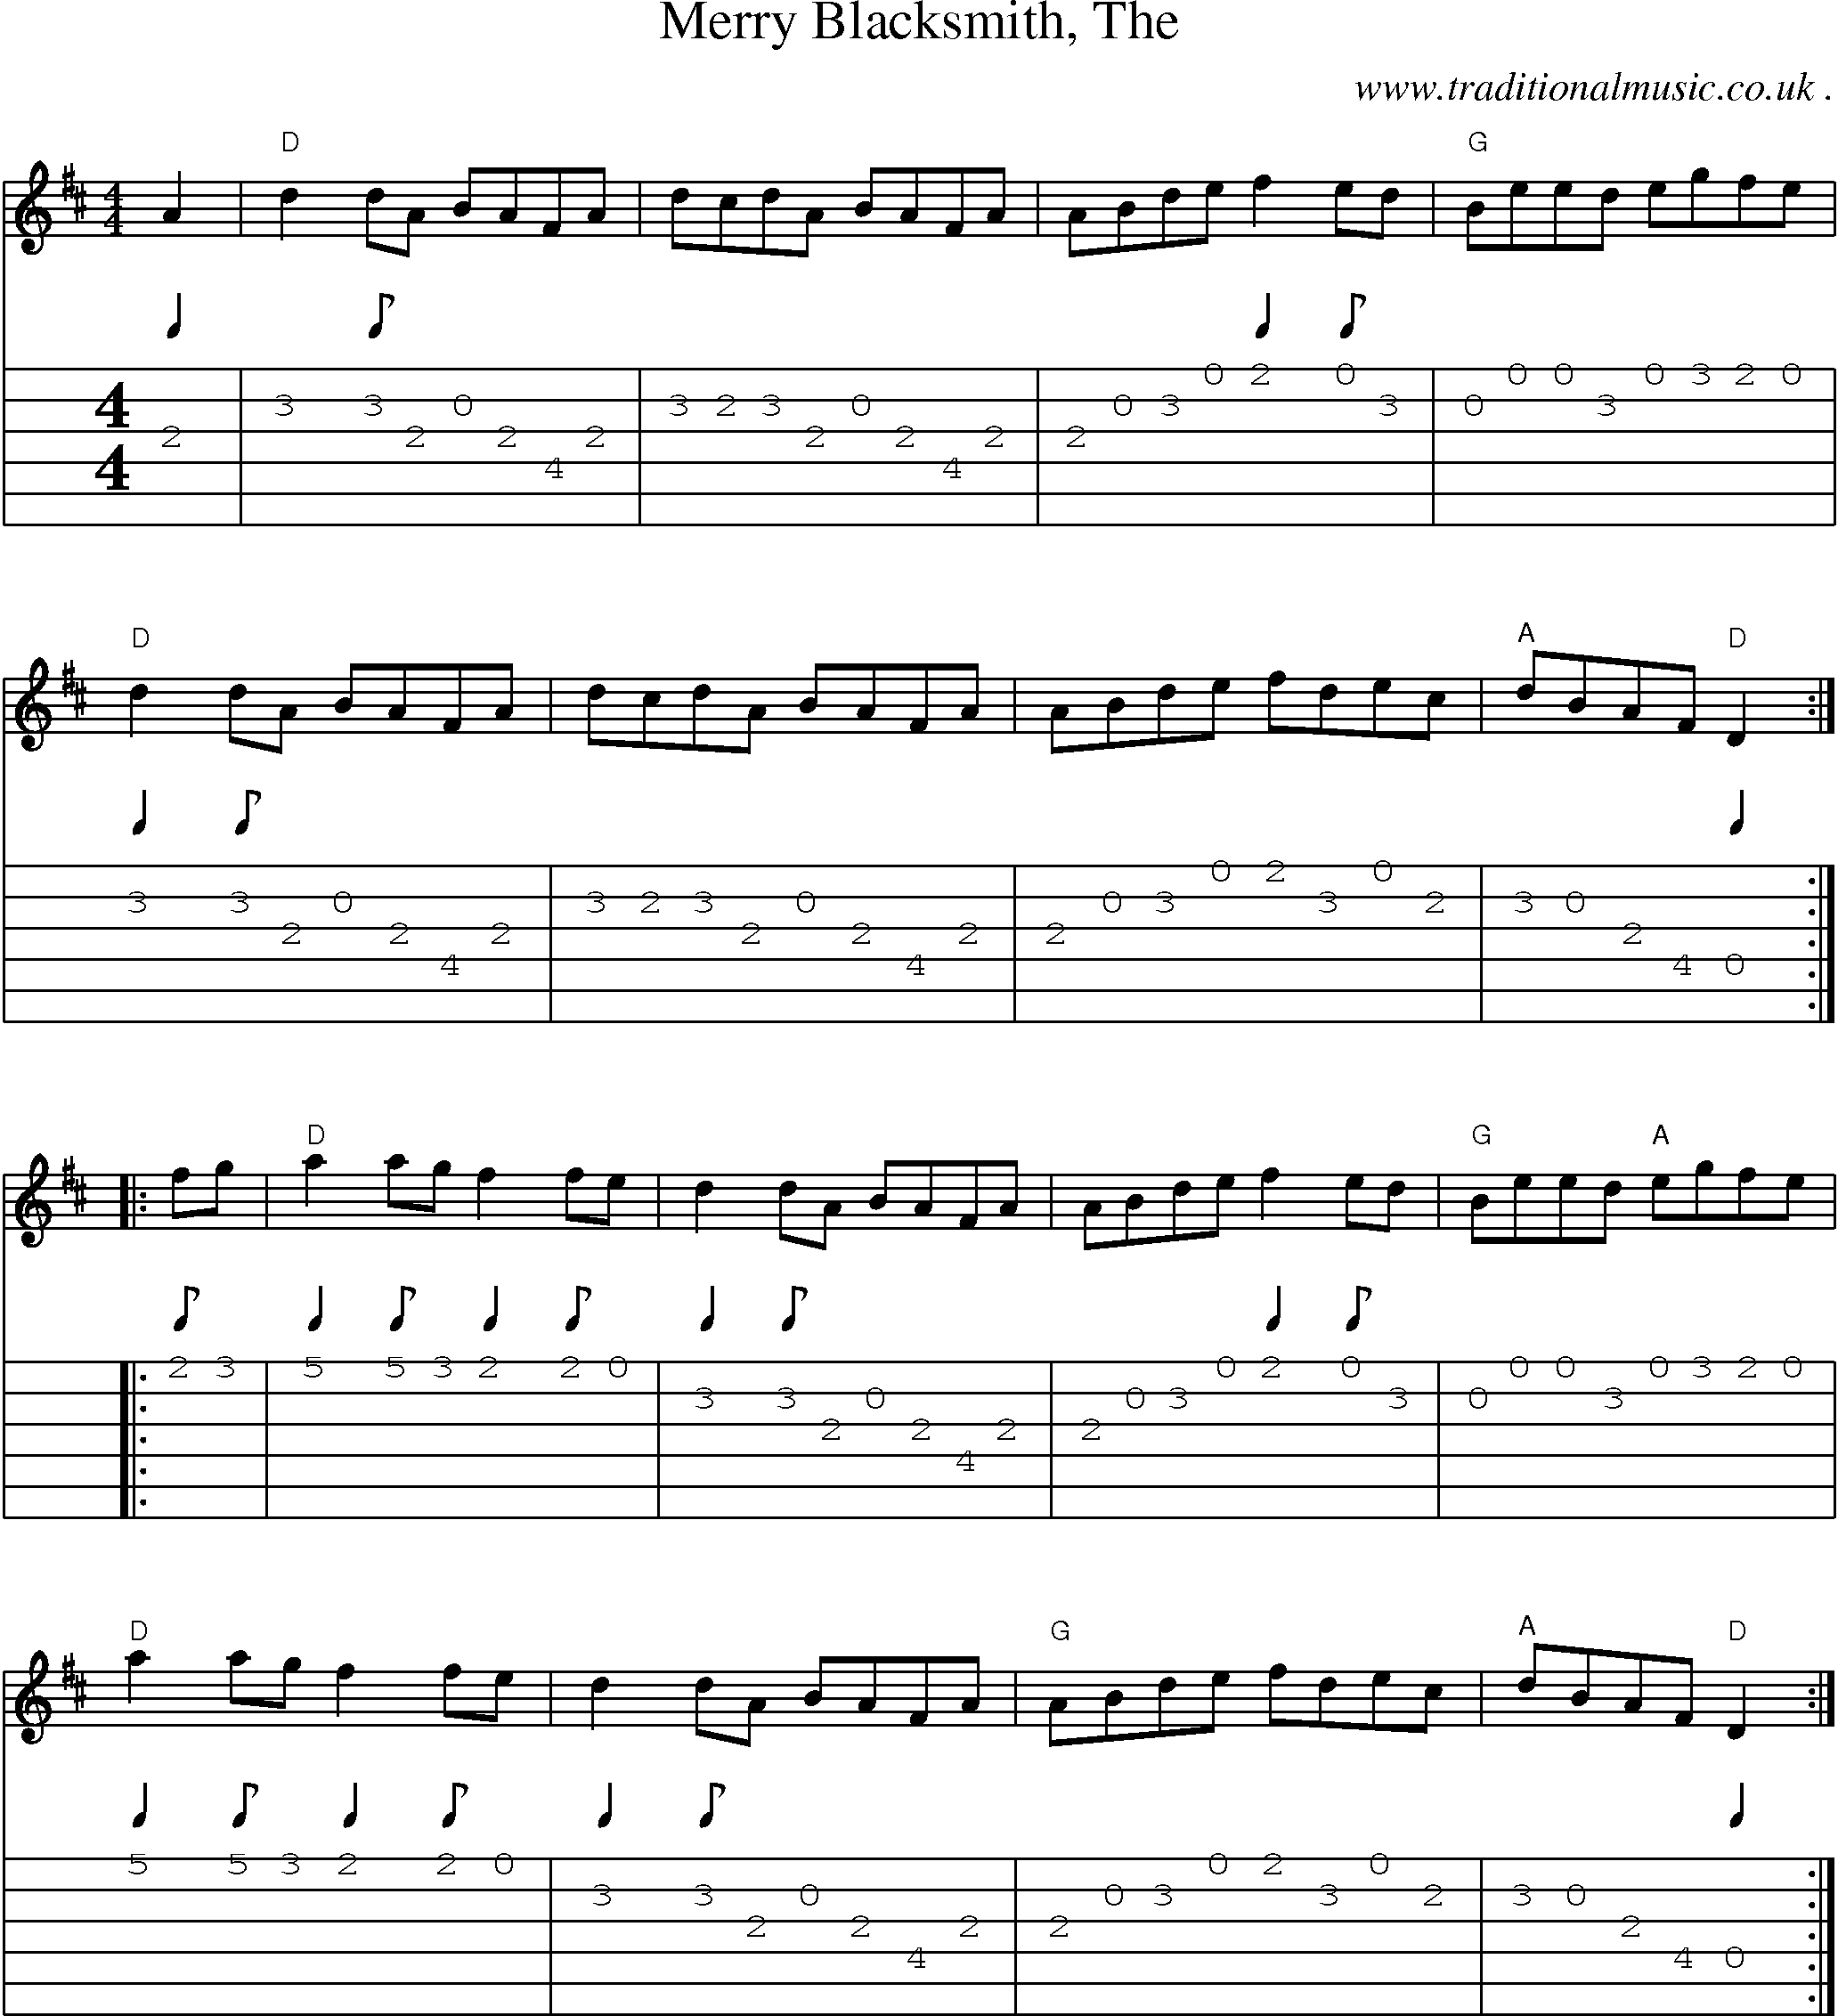 Music Score and Guitar Tabs for Merry Blacksmith The1